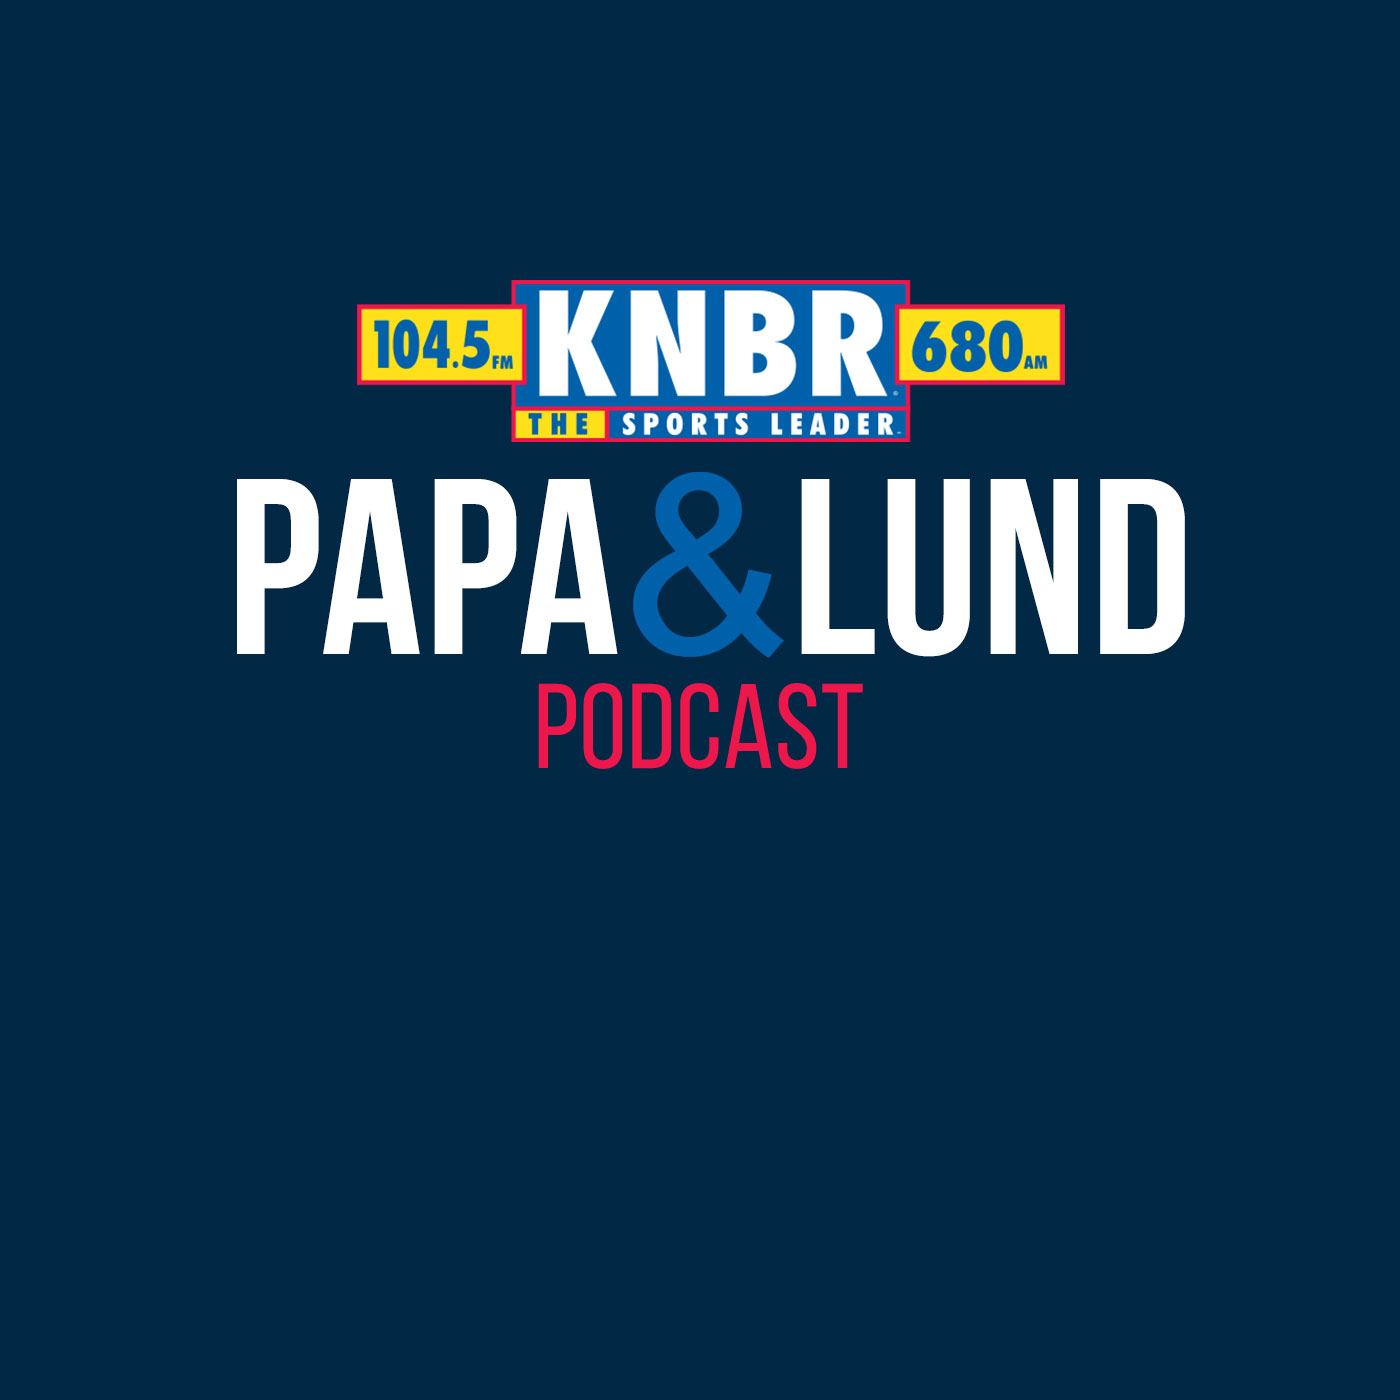 4-17 Papa & Lund Show - 1pm Hour - Papa & Lund discuss if Klay Thompson has played his final game as a Warrior and the importance of having a secondary scorer to Steph Curry + Interview with Kurt Helin